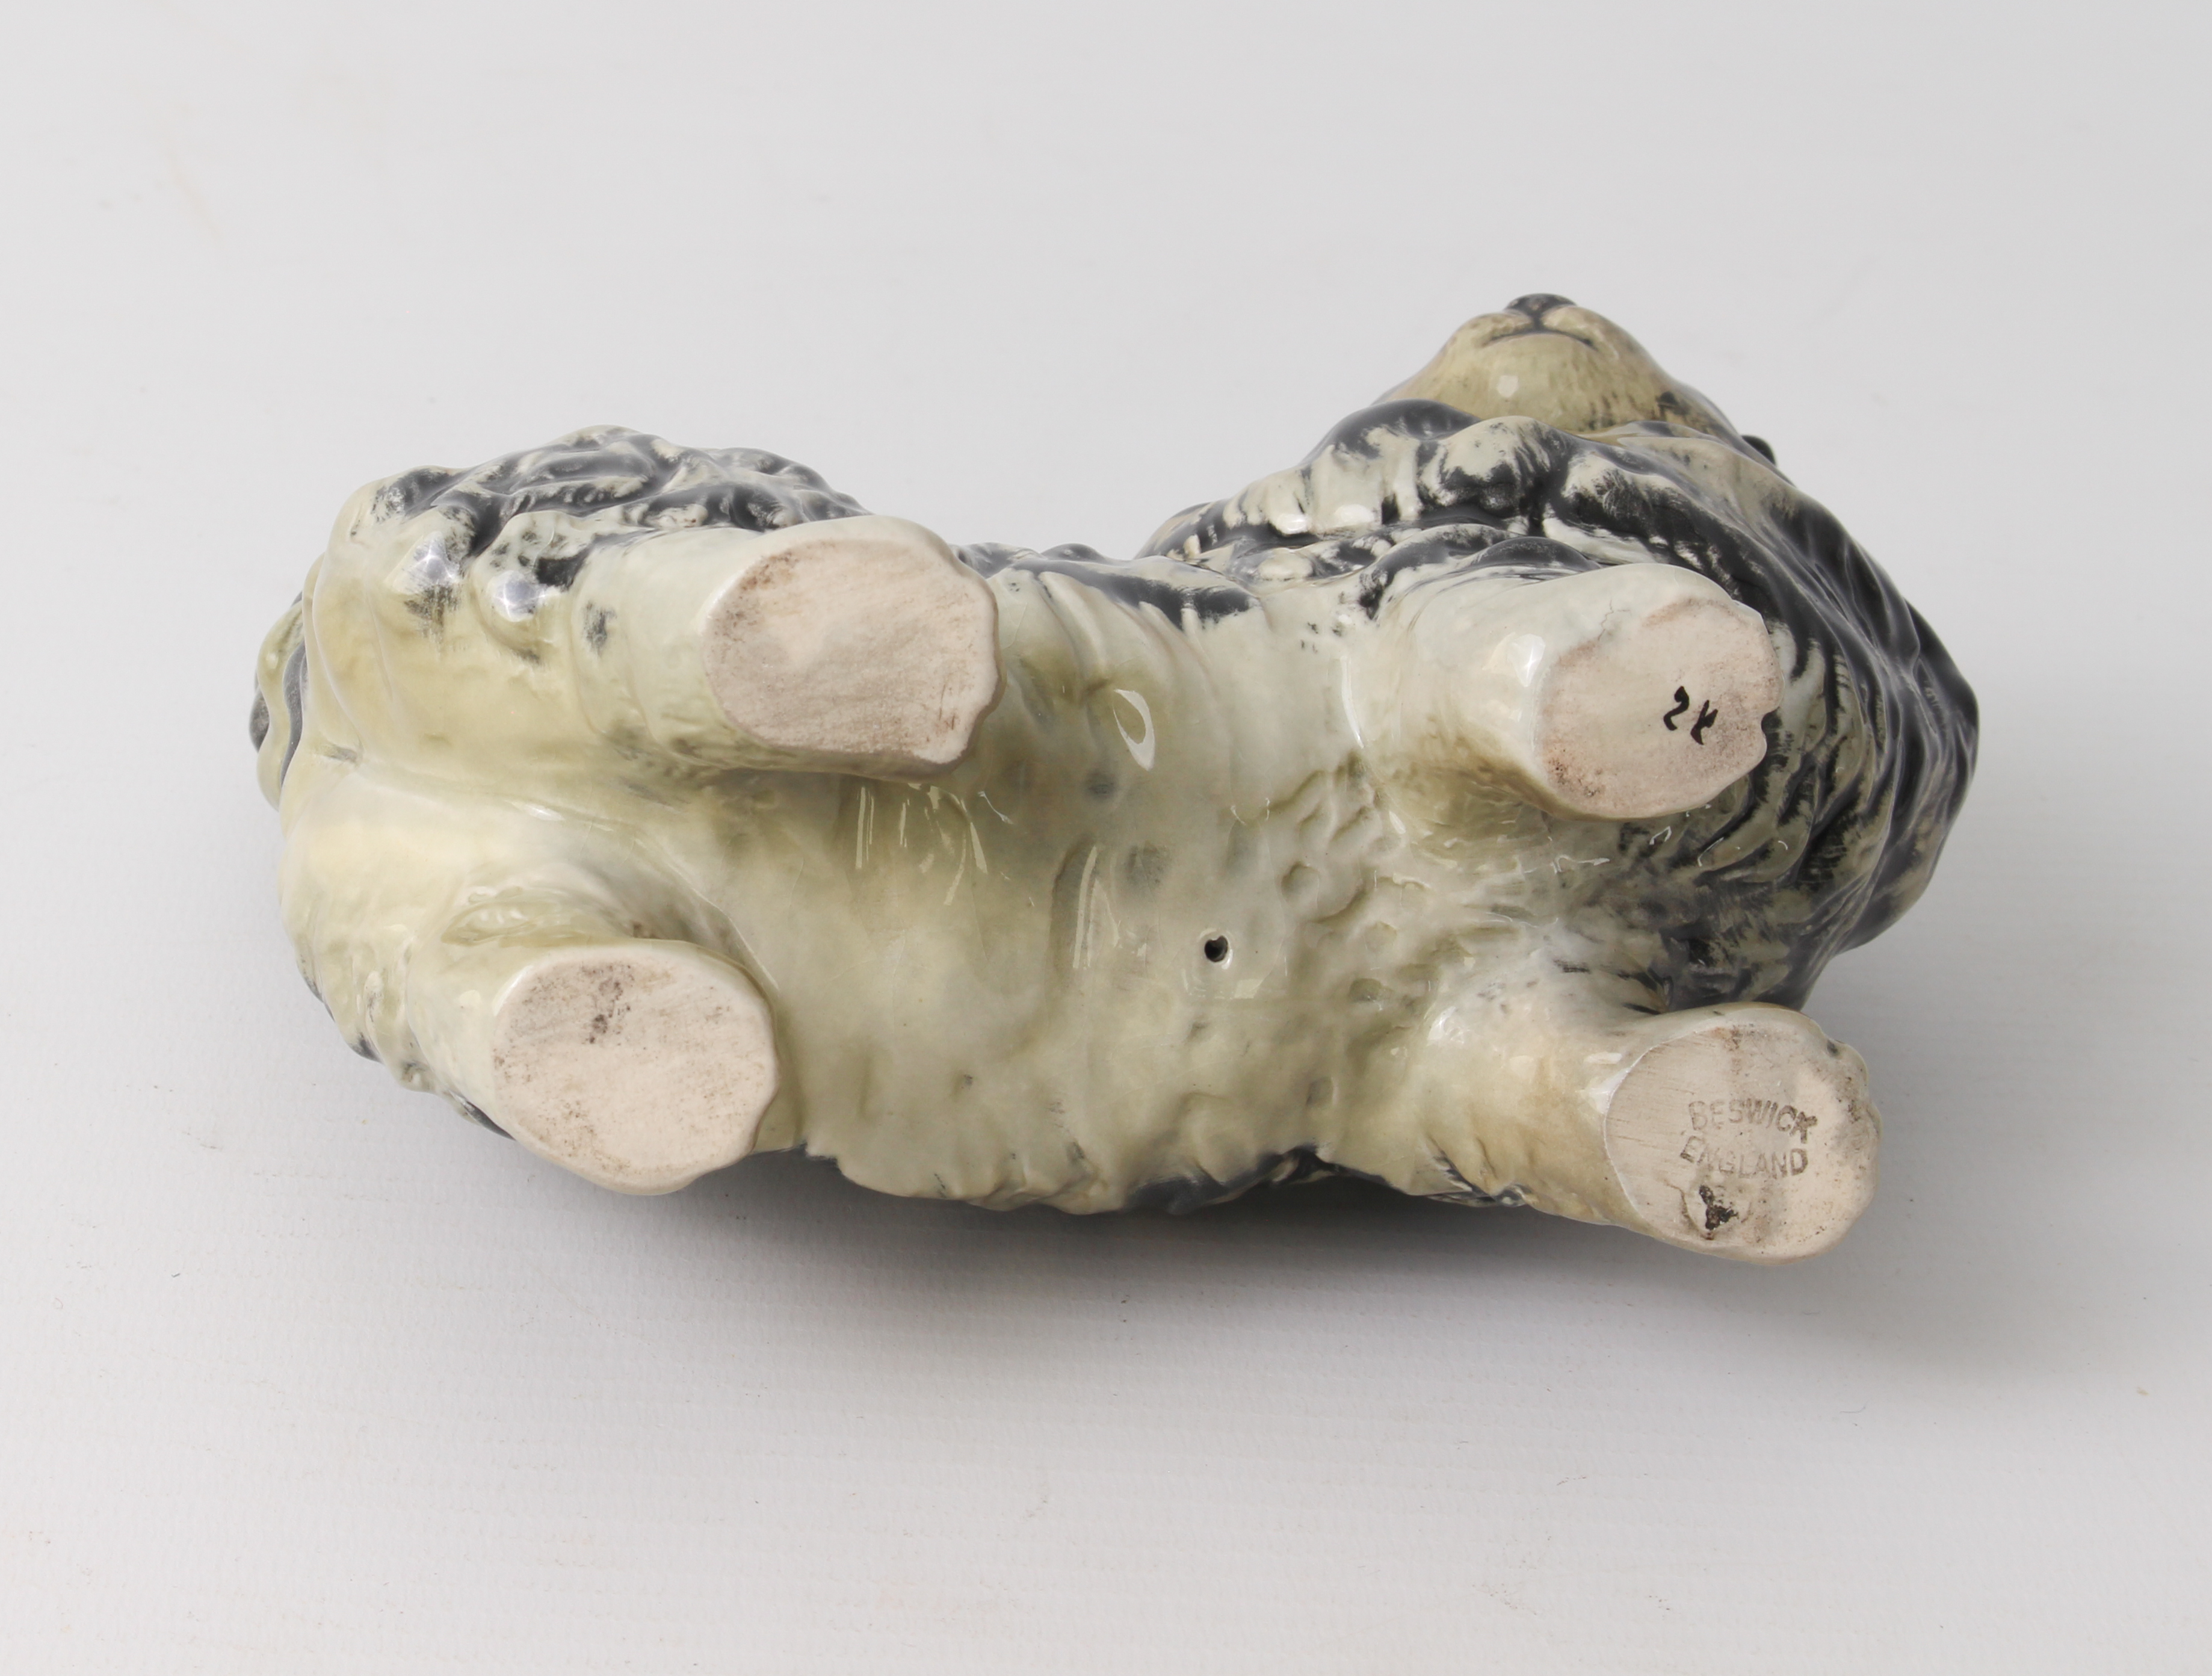 A Beswick Persian Cat 1898 figure, in grey Swiss roll colourway - designed by Albert Hallam, printed - Image 3 of 3